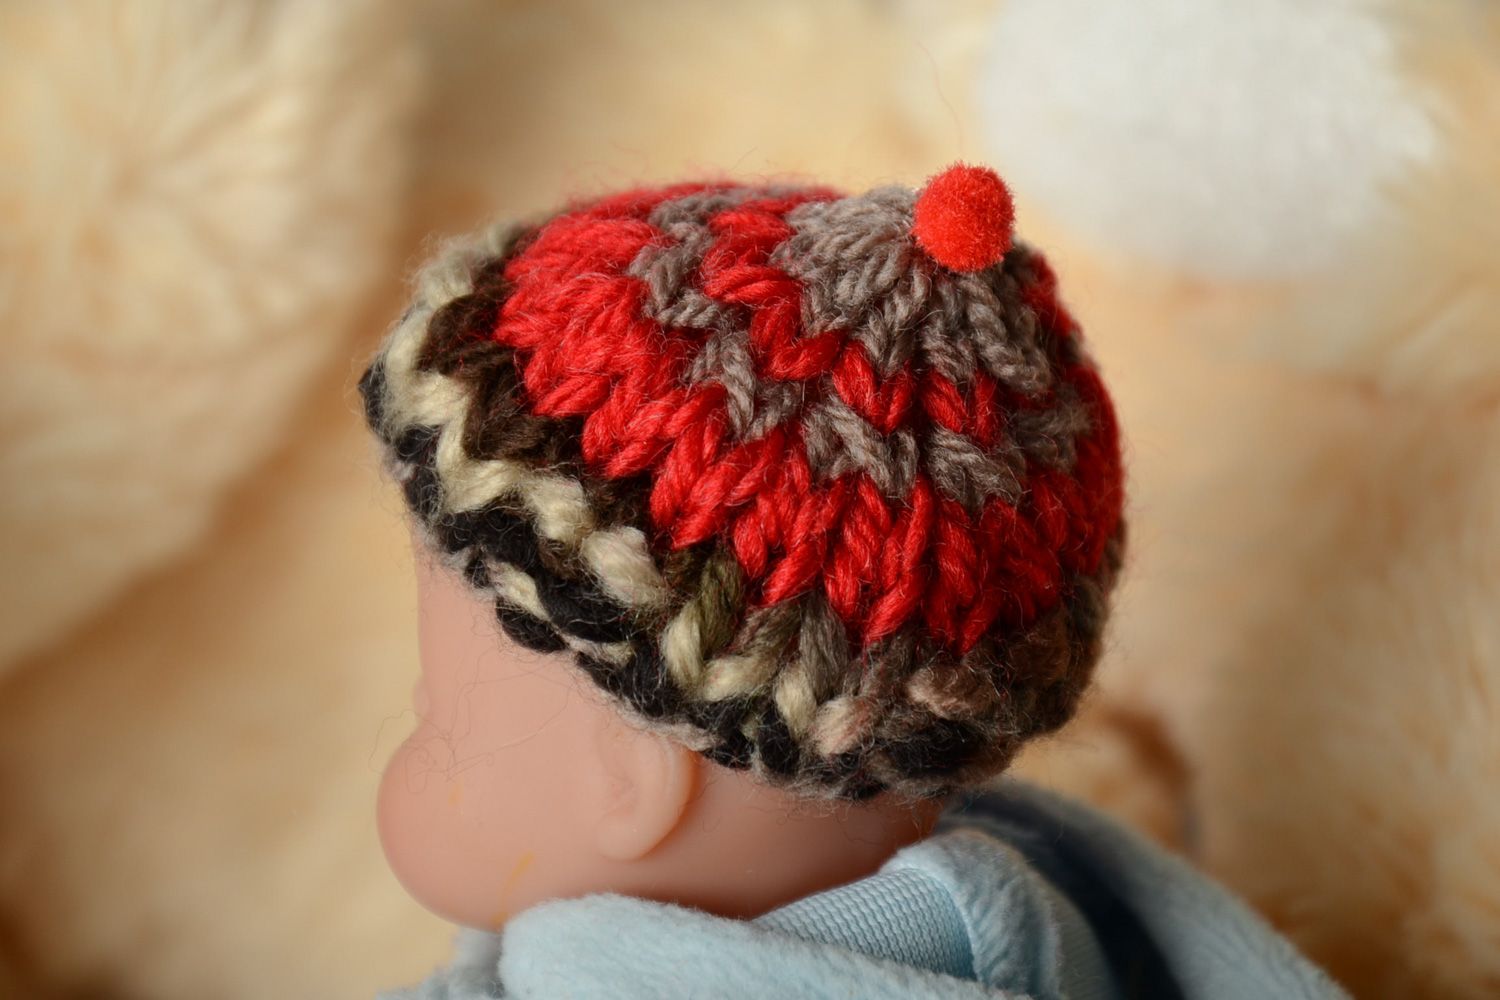 Knitted red hat for a baby toy. Two inches in diameter photo 1